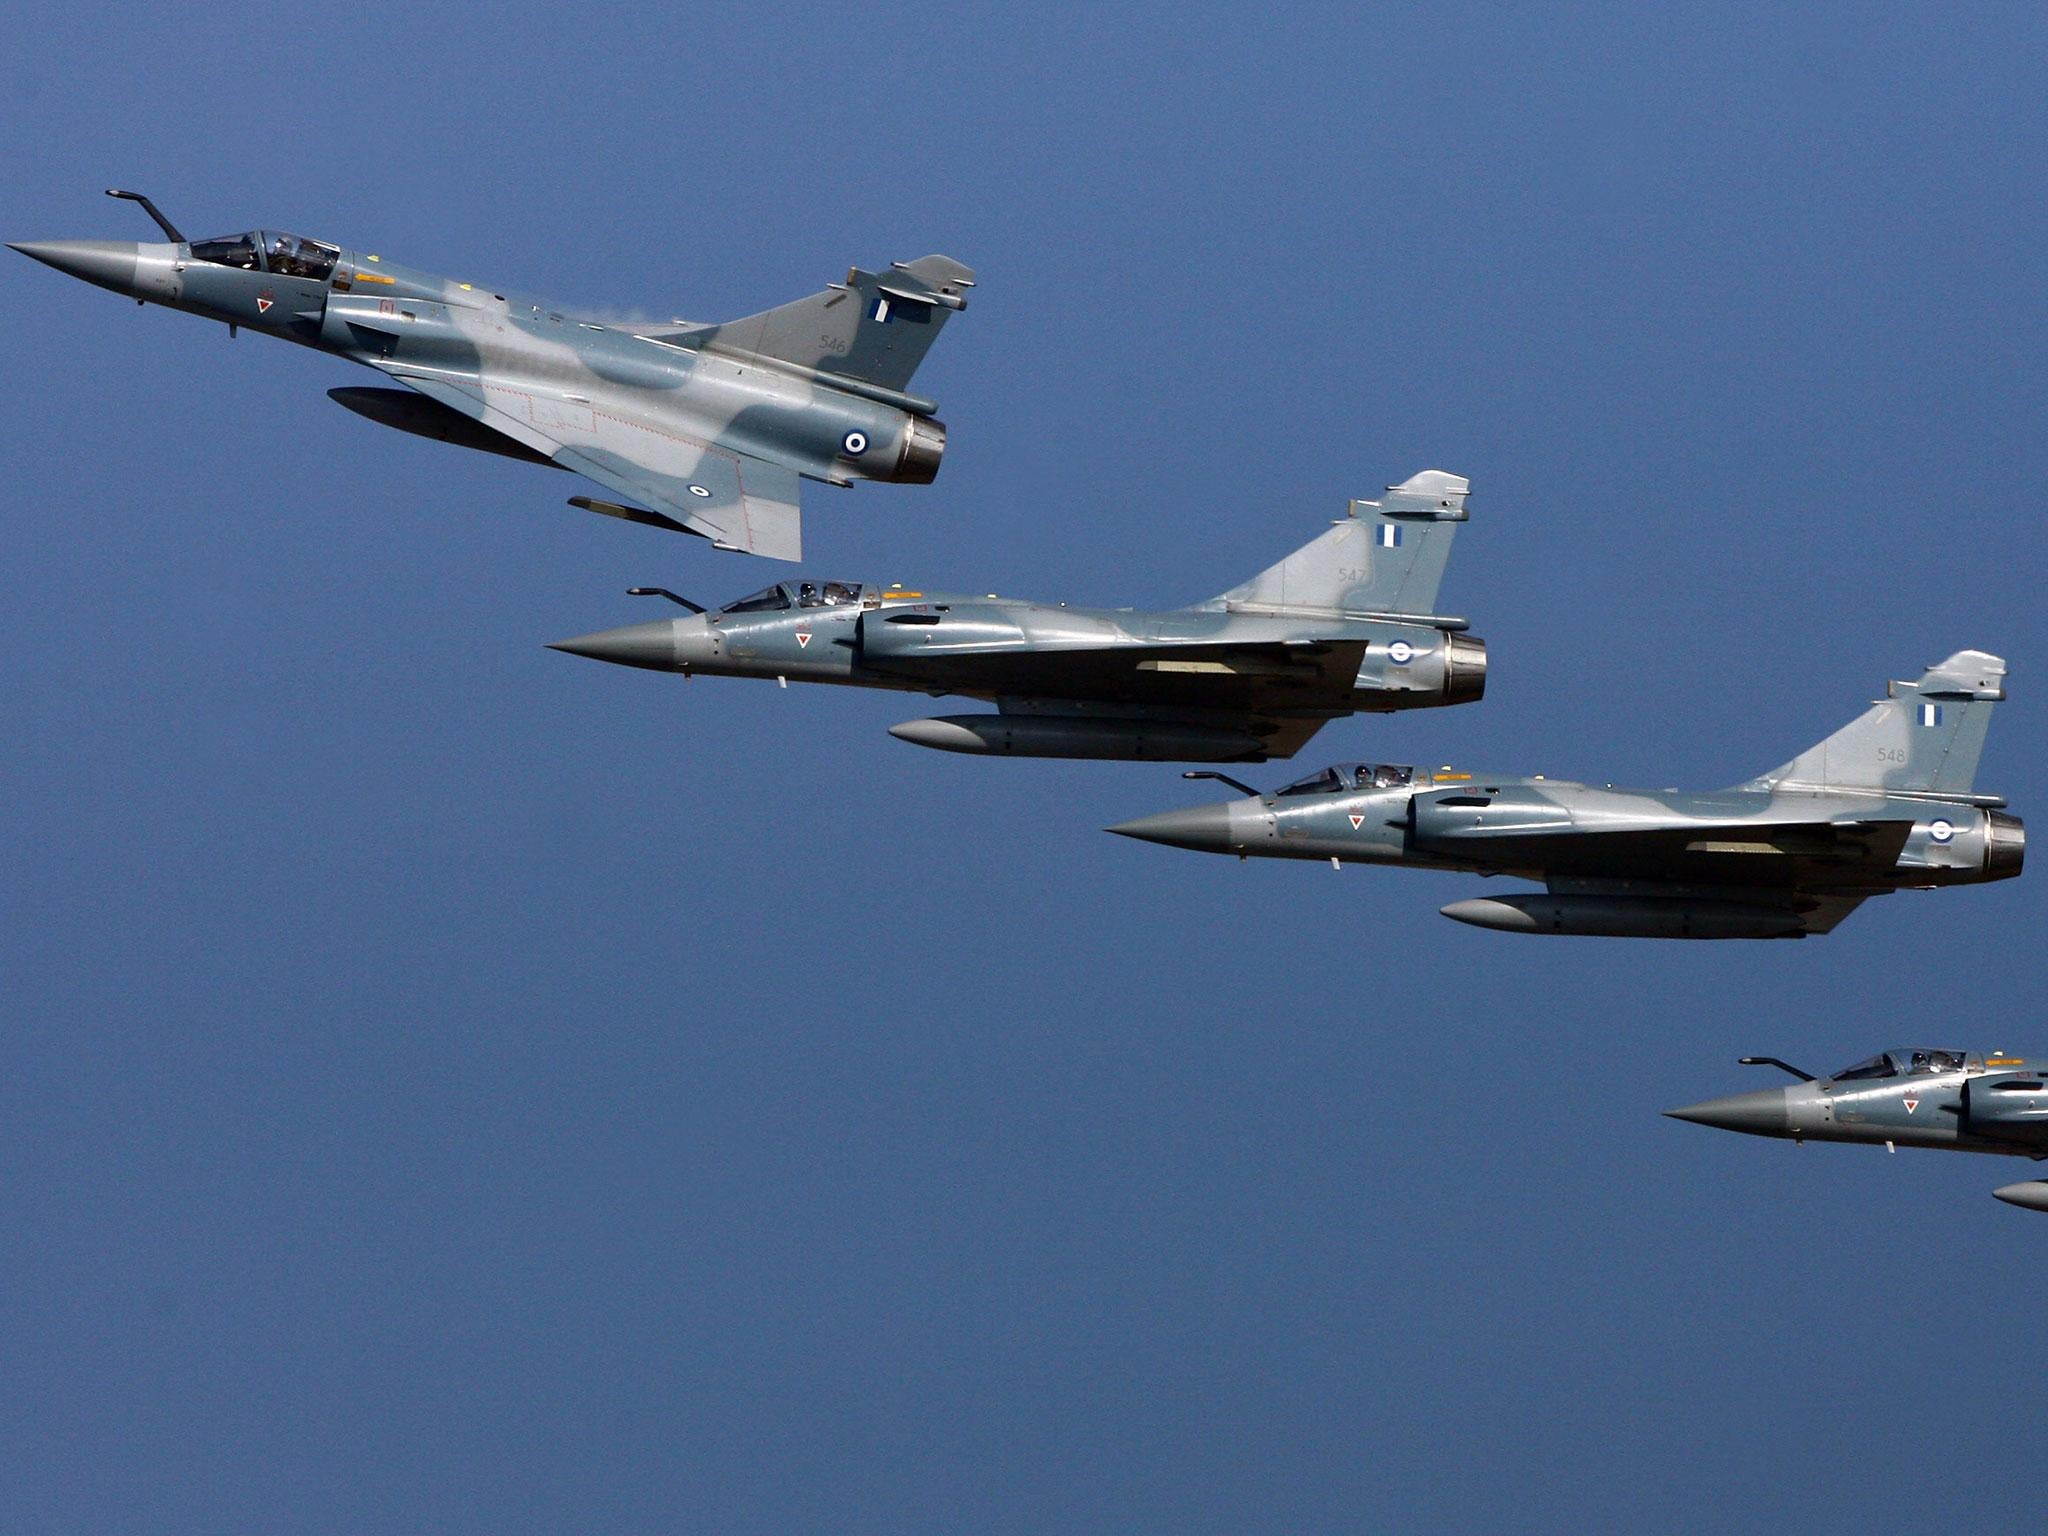 File image: Greece incorporated 15 Mirage 2000-5 fighter jets into its airforce in 2007